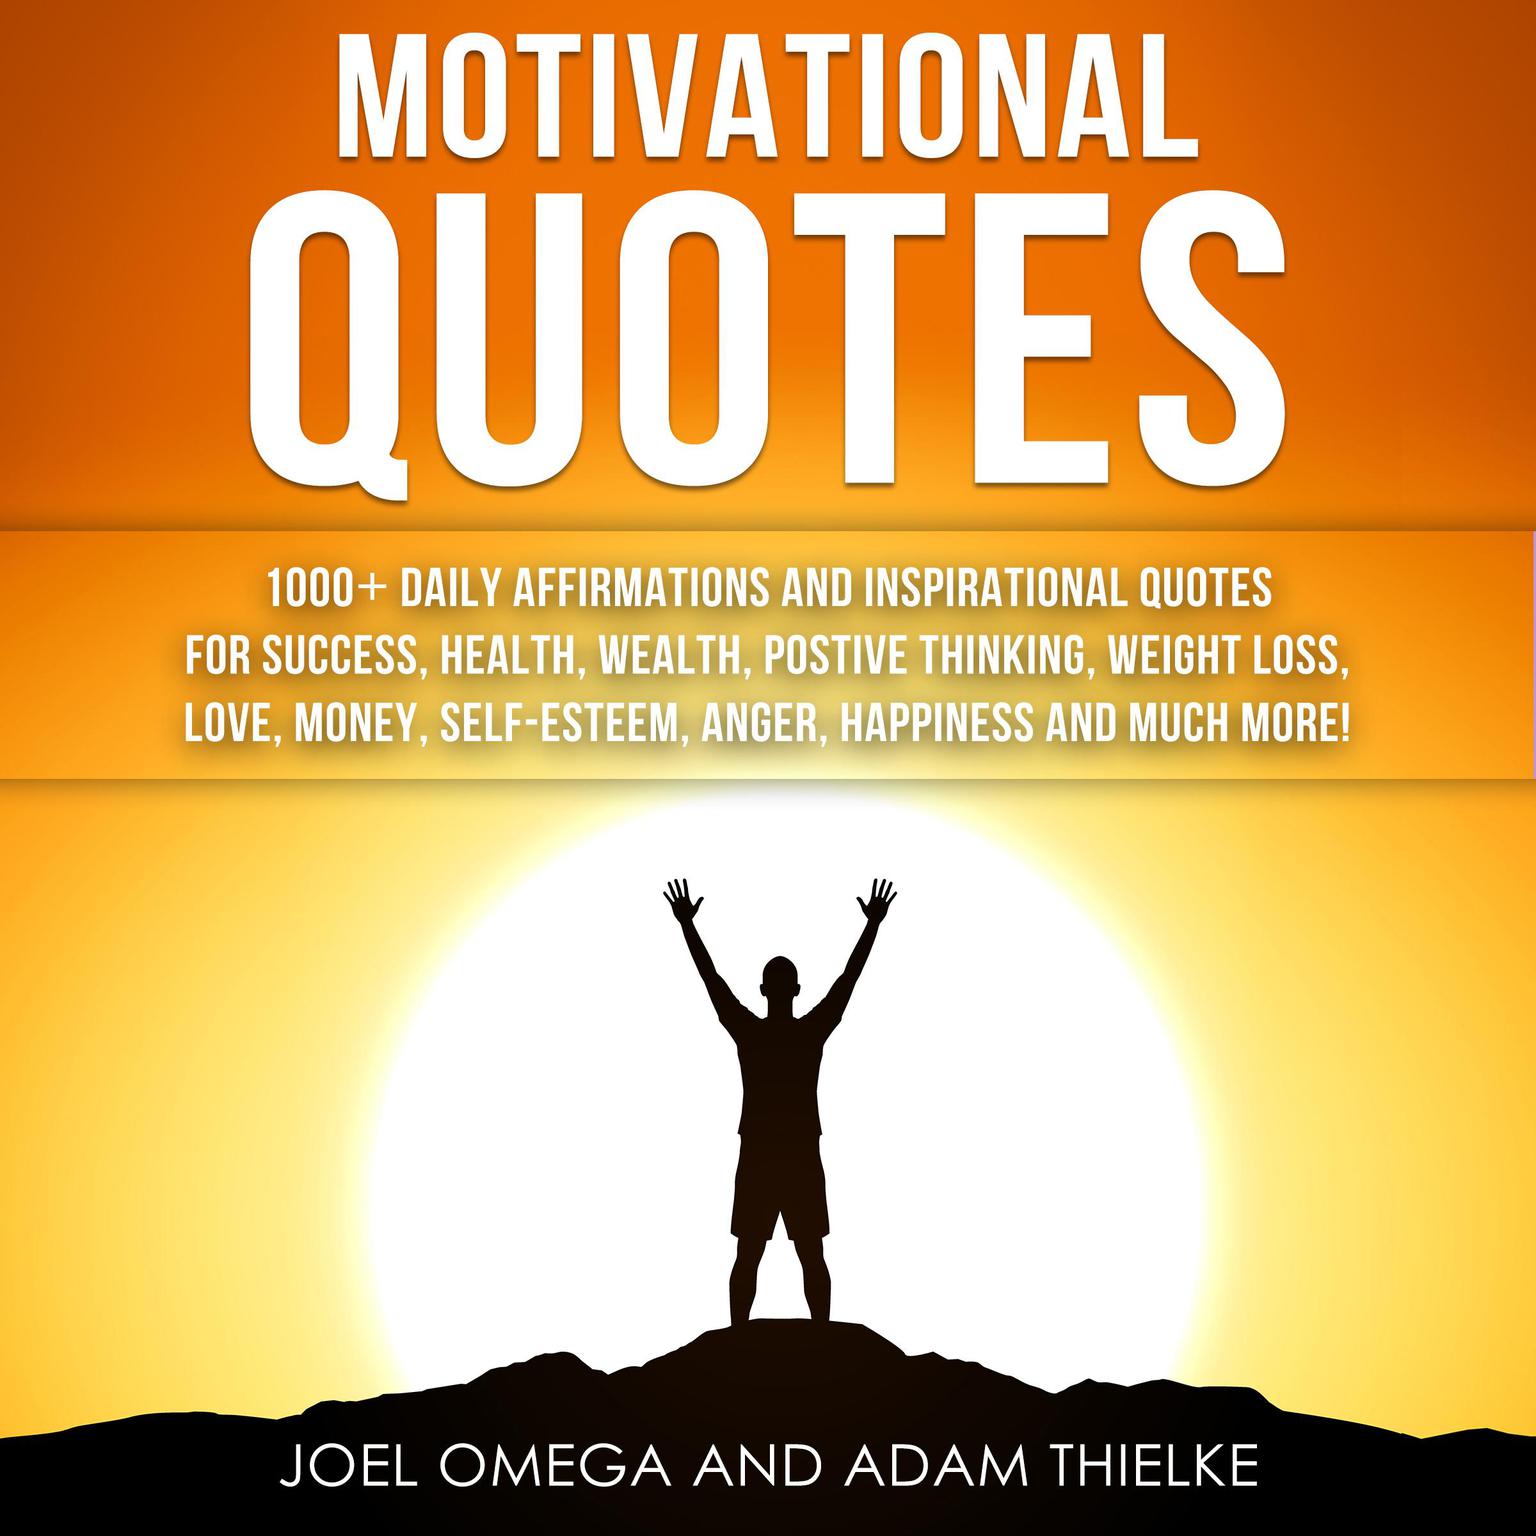 Motivational Quotes: 1000+ Daily Affirmations and Inspirational Quotes for Success, Health, Wealth, Positive Thinking, Weight Loss, Love, Money, Self-Esteem, Anger, Happiness and Much More! Audiobook, by Adam Thielke